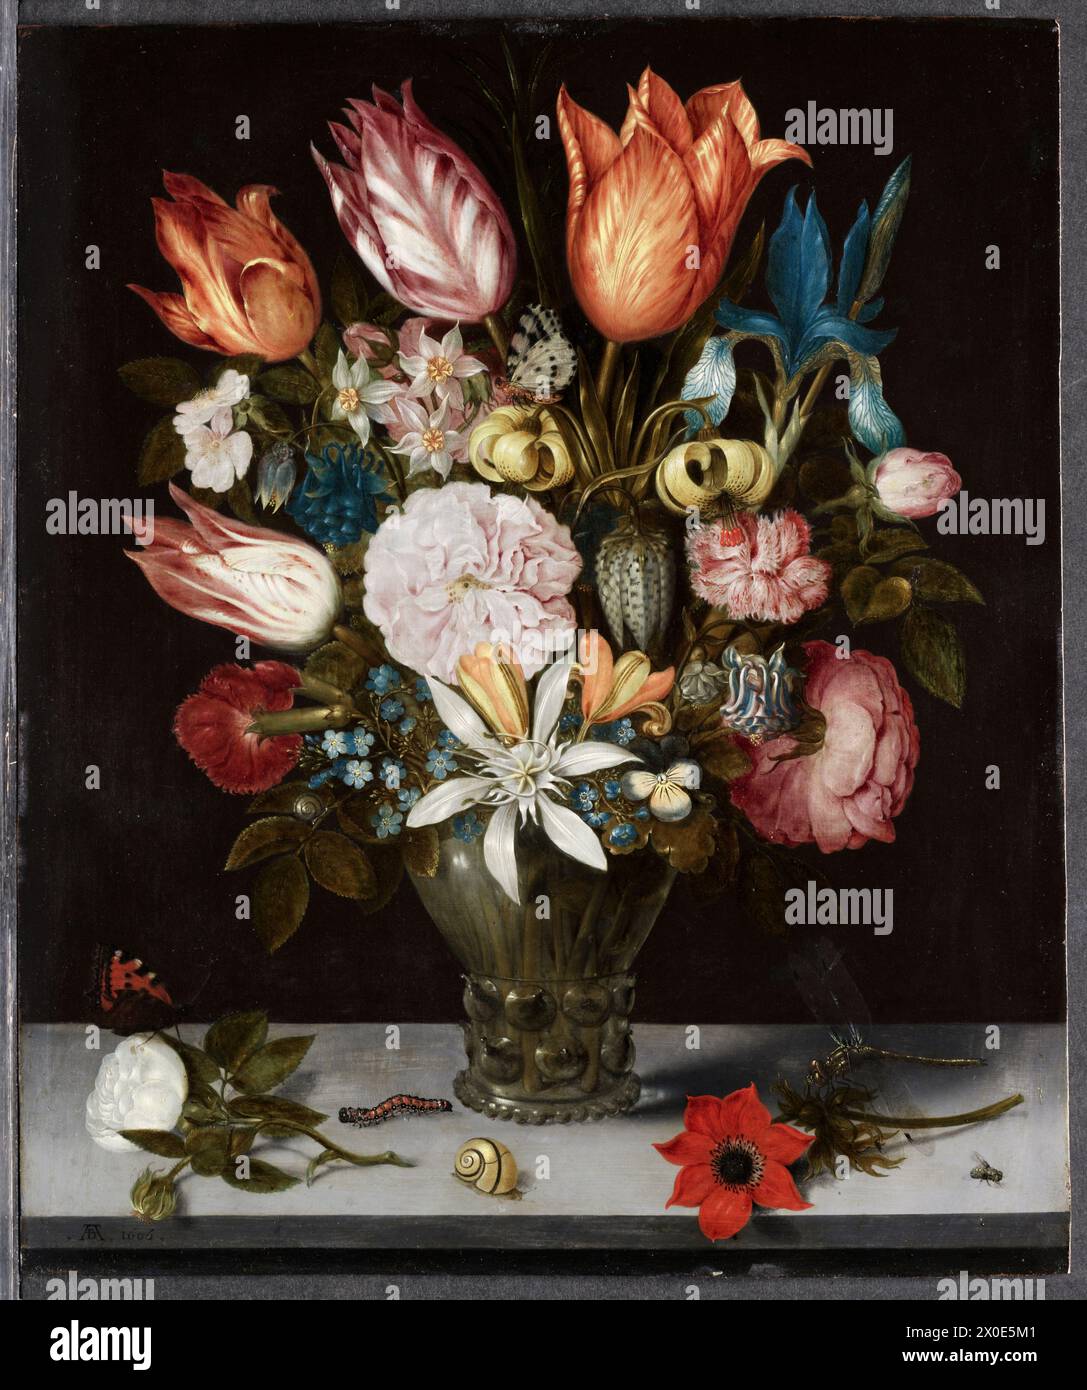 Flowers in a Glass. Ambrosius Bosschaert. 1606. Oil on copper. Stock Photo